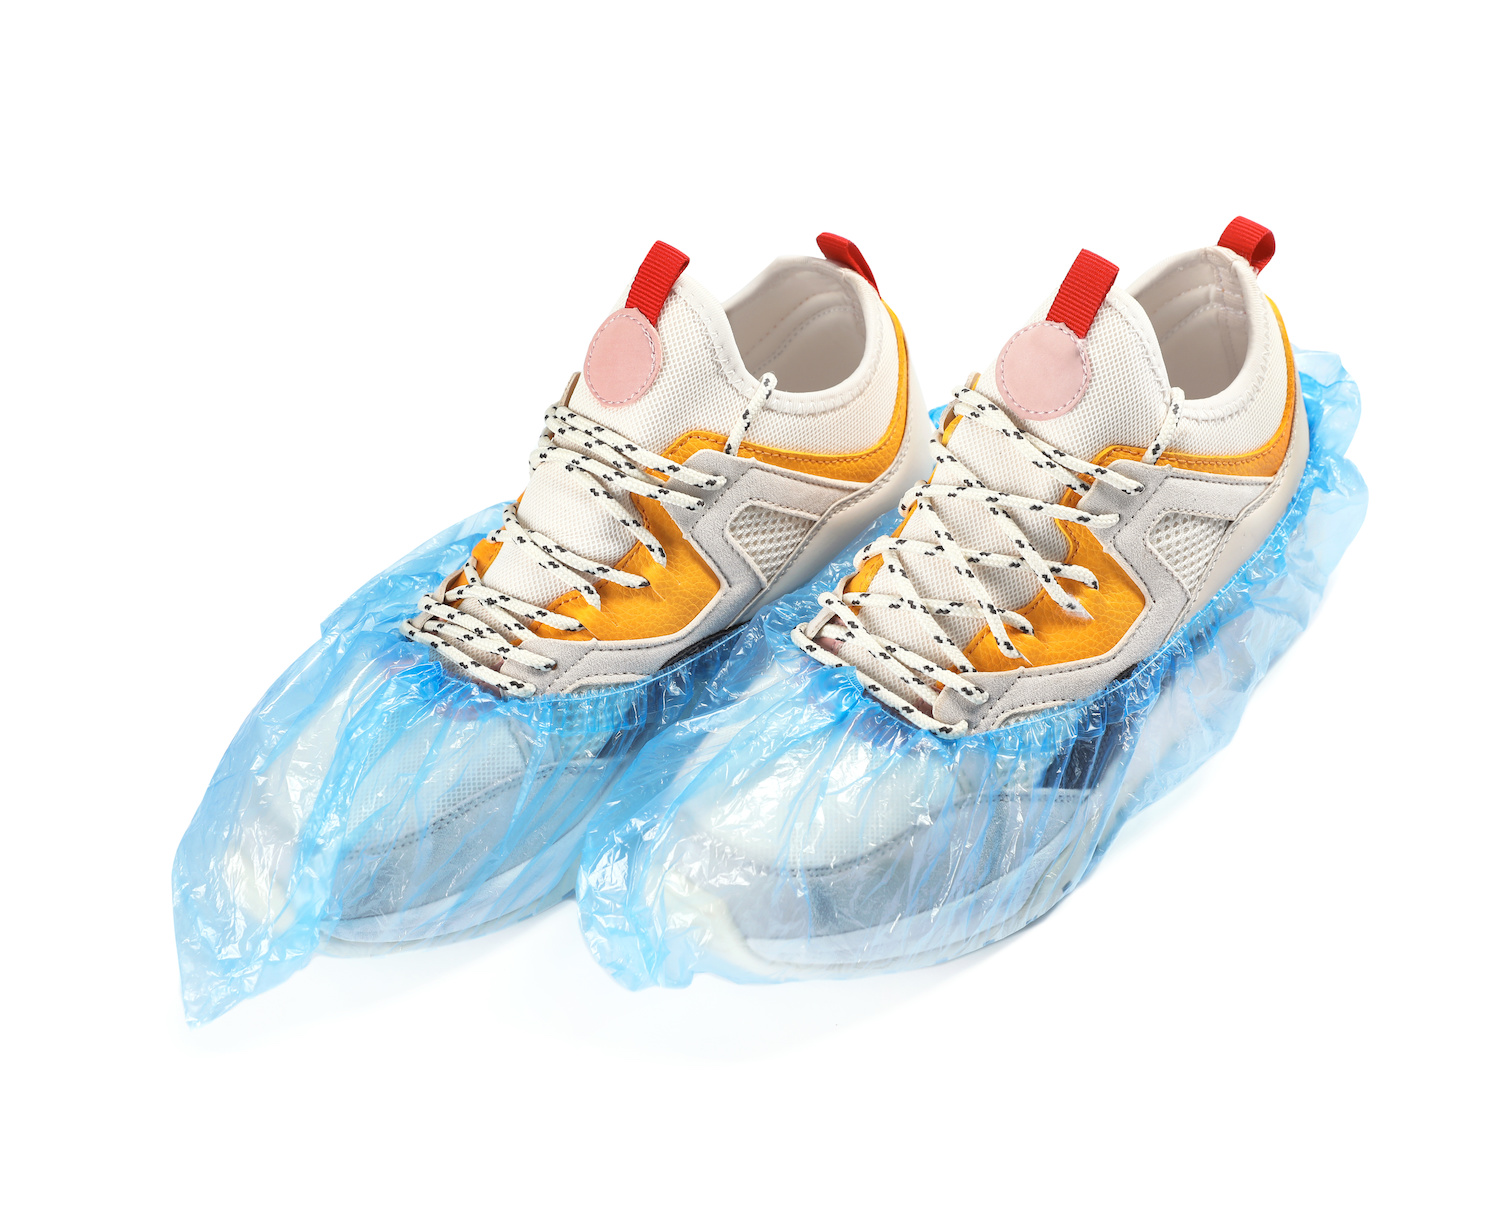 Pair of sneakers in medical blue covers on white background